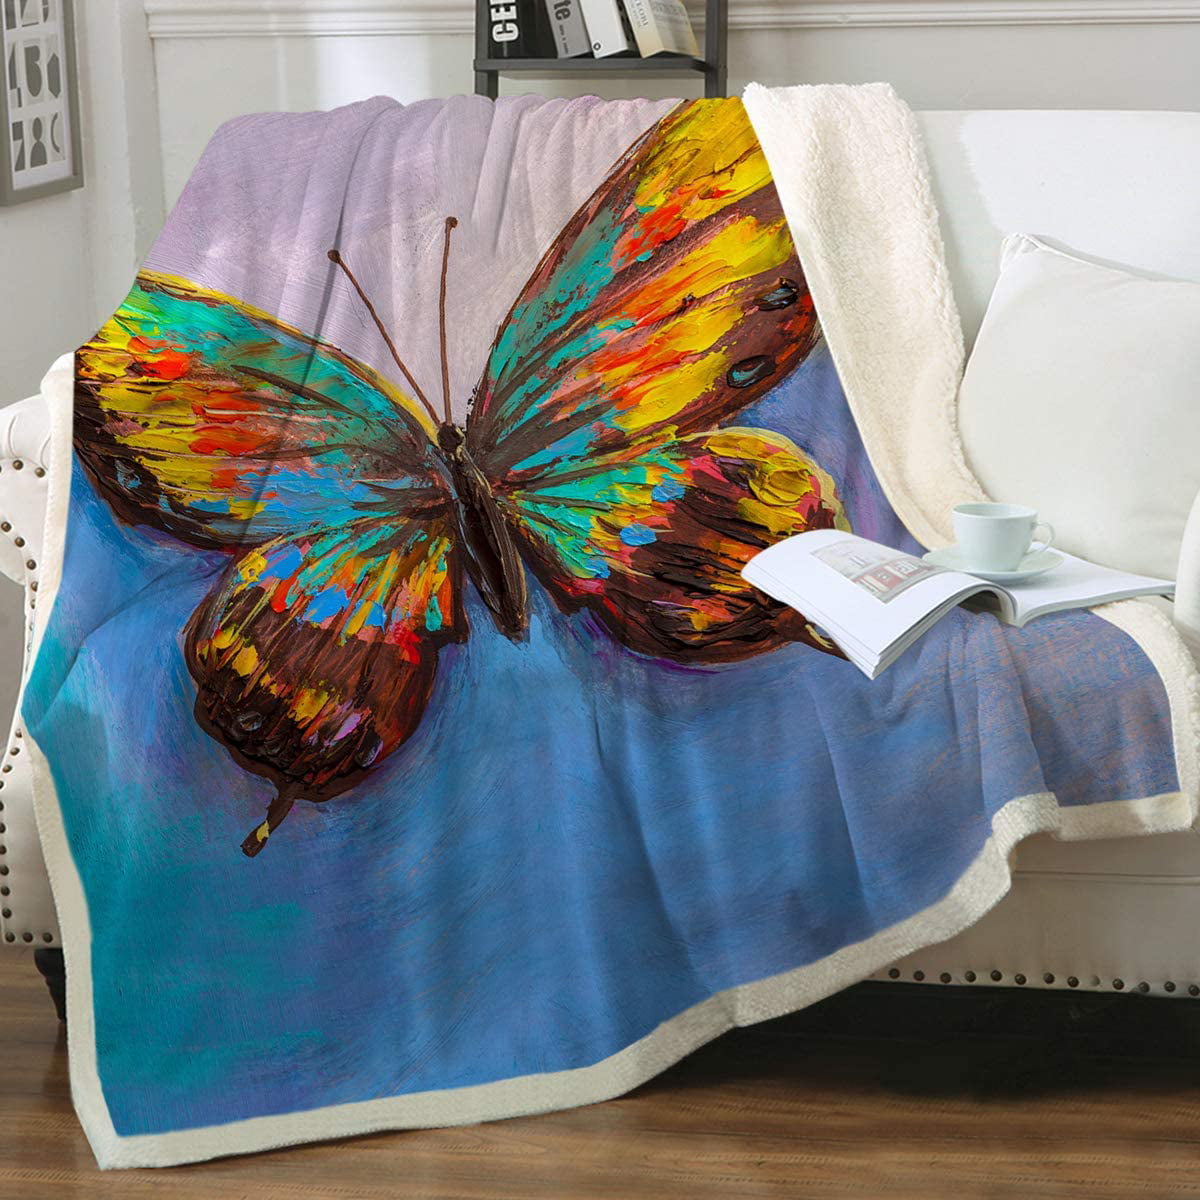 Just For Kids Butterfly 50 x 60 Plush Throw Blanket Pink/Blue/Yellow/Teal 